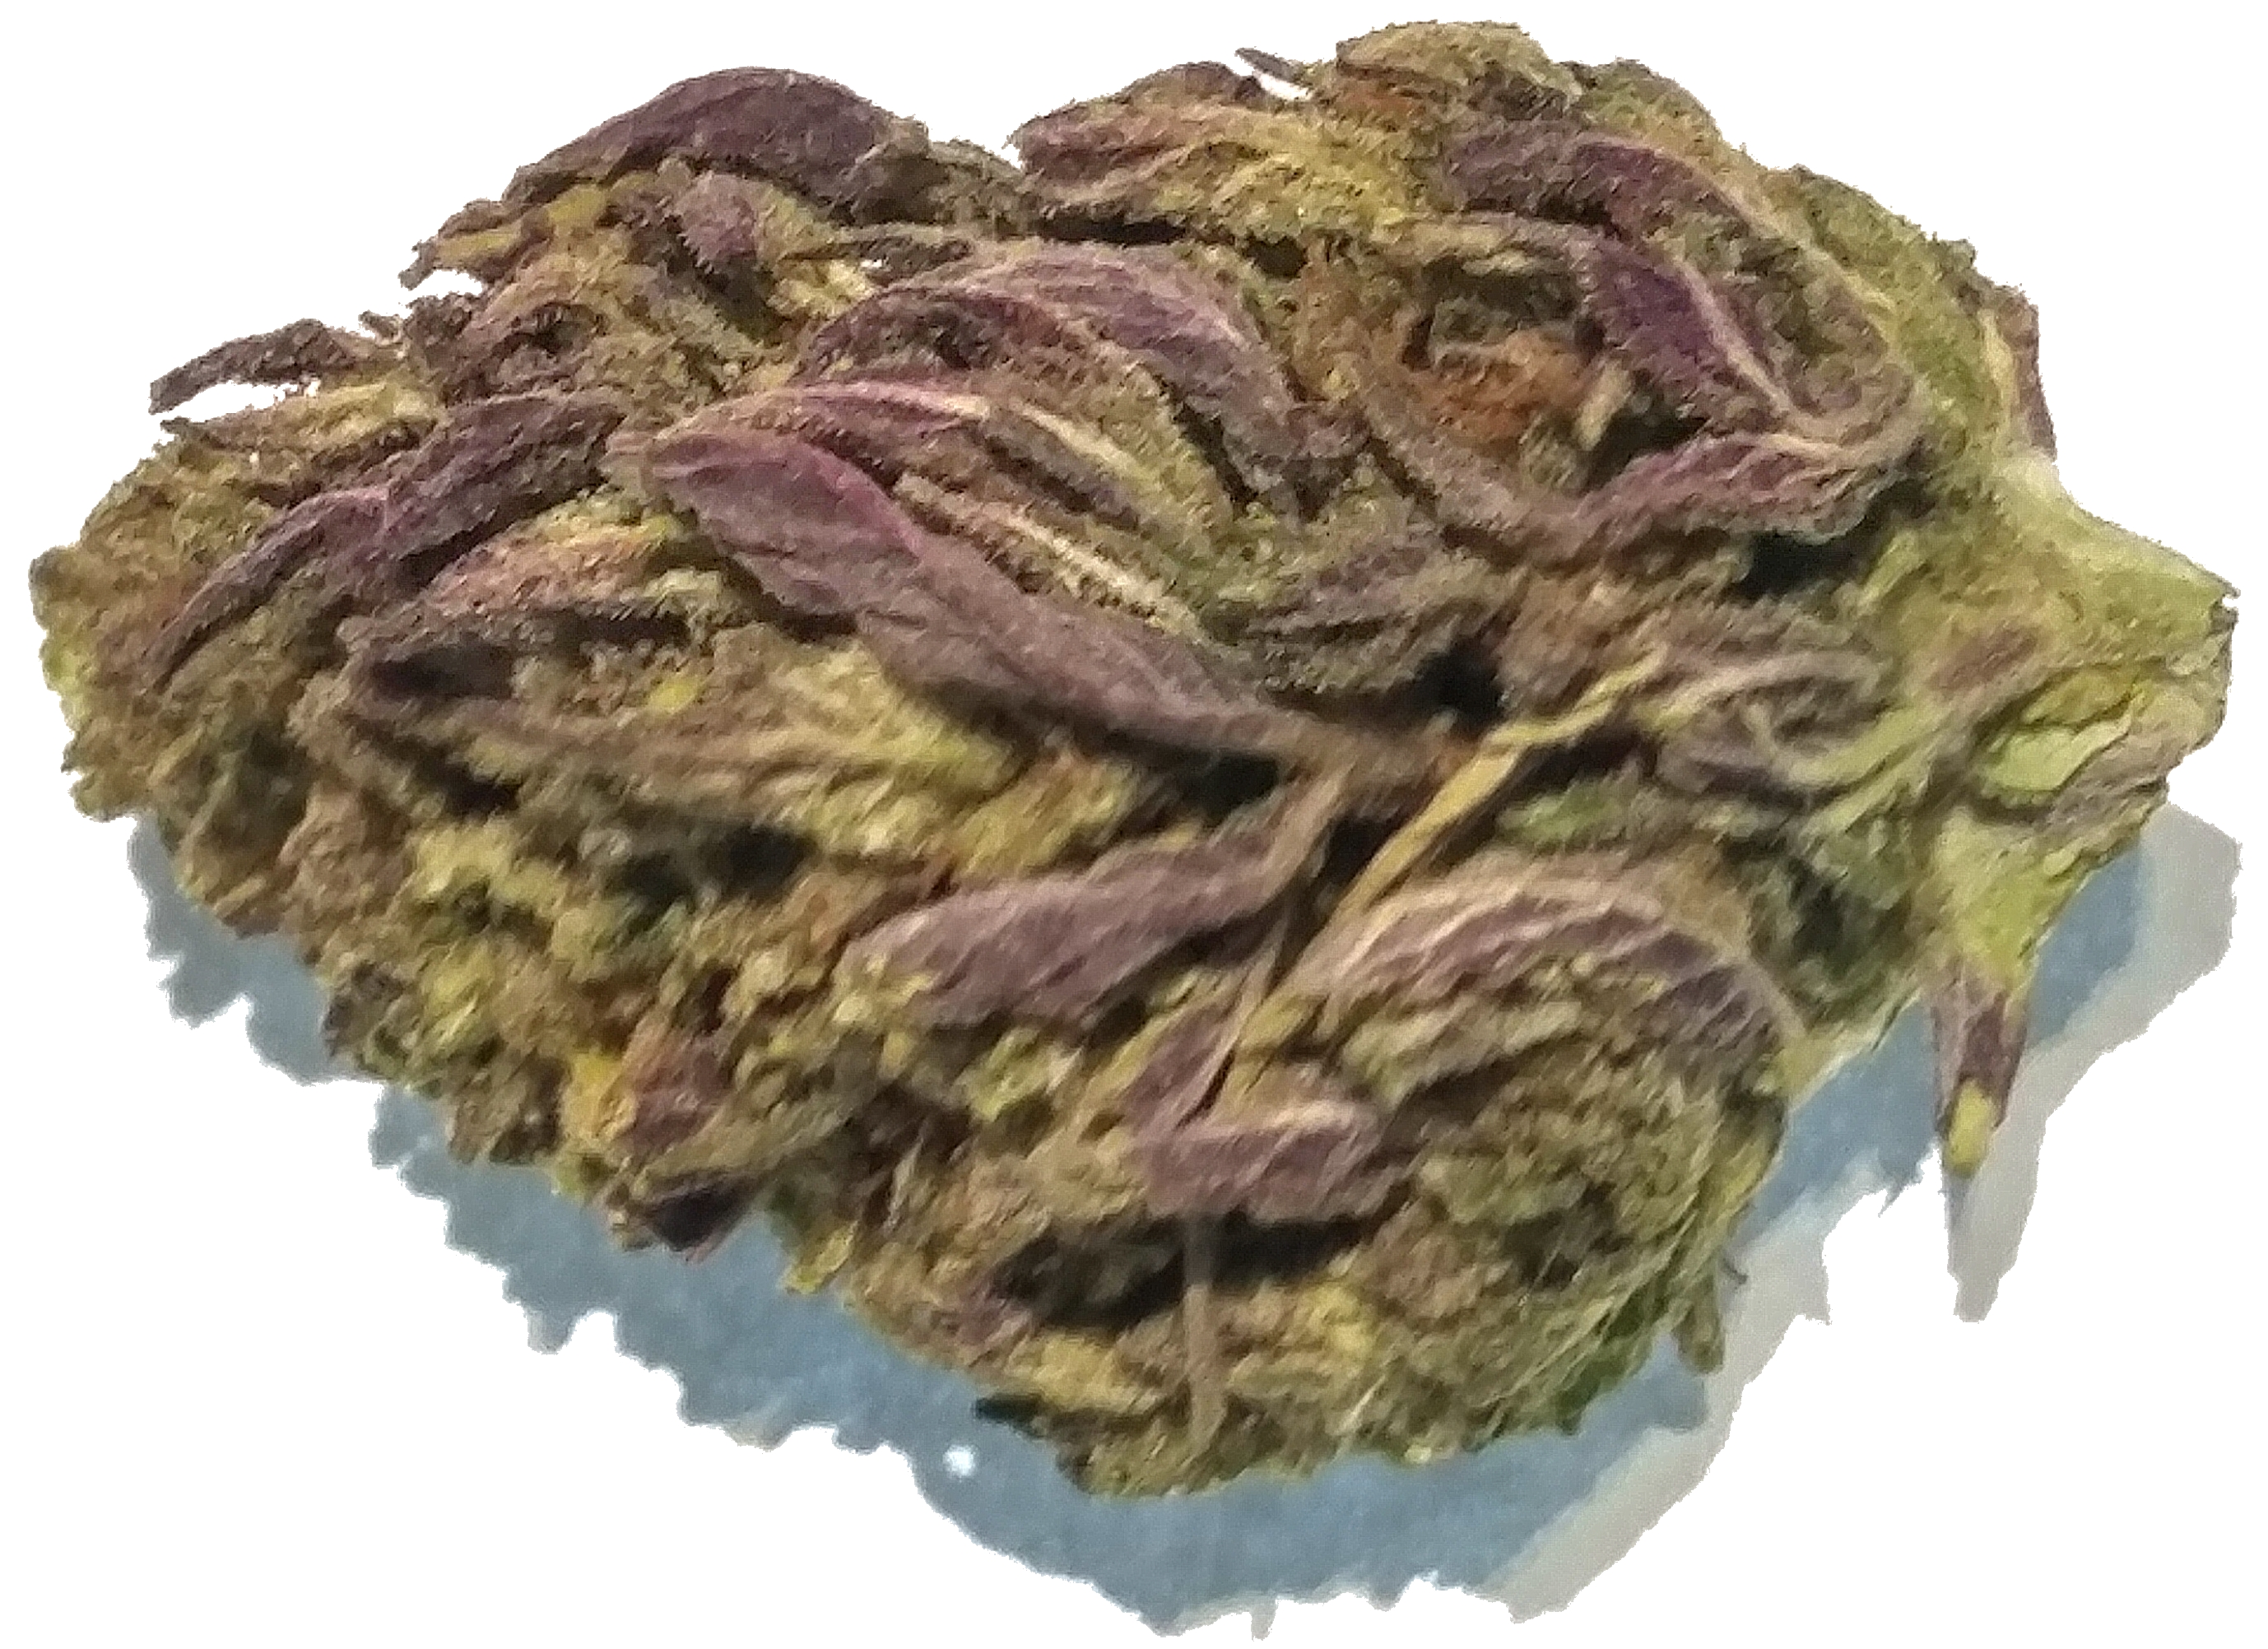 Sour Space Candy Industrial Hemp Flower Buds